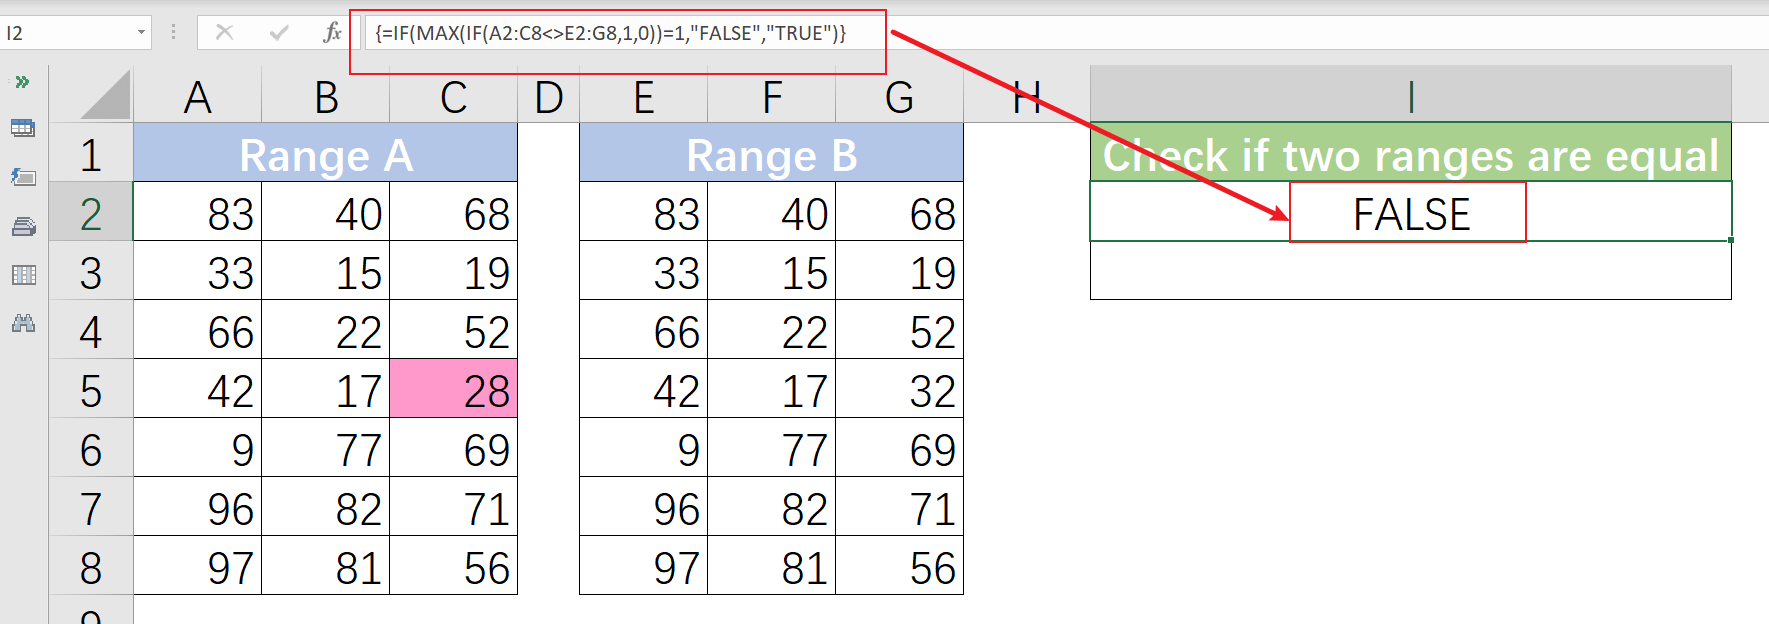 doc check-two-ranges-equal 2